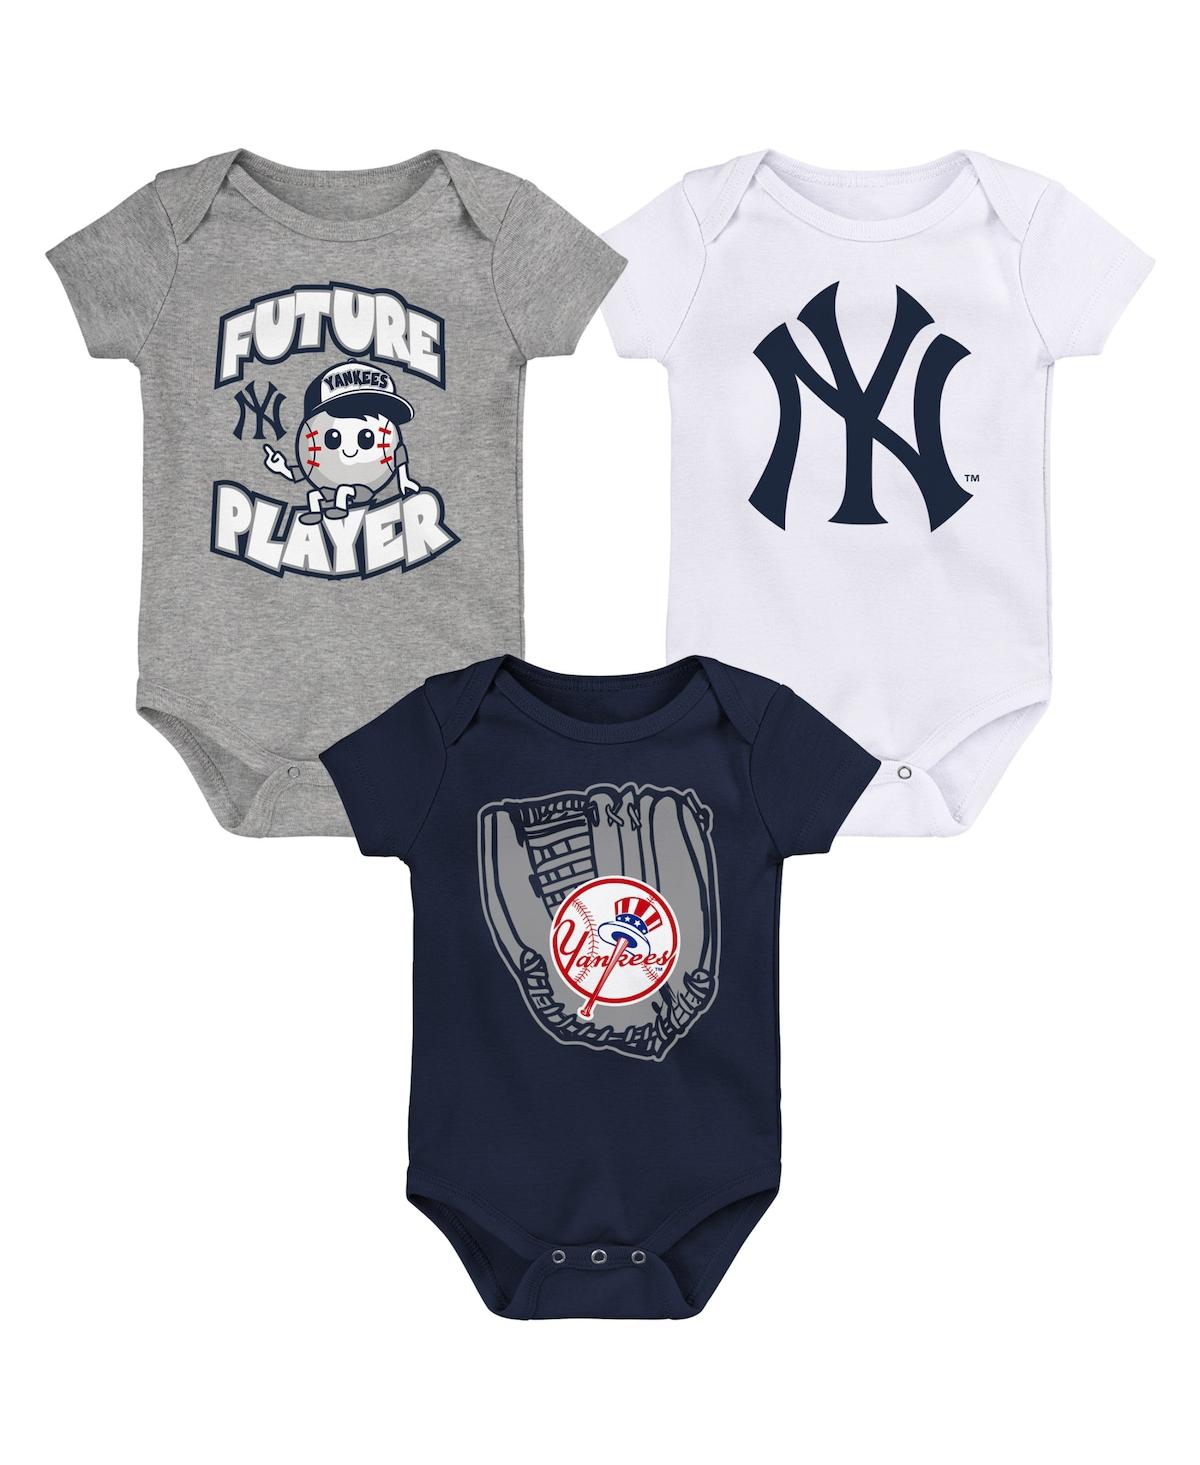 Outerstuff Babies' Newborn And Infant Boys And Girls Navy, White, Heather Gray New York Yankees Biggest Little Fan 3-pa In Heather Gray,navy,white